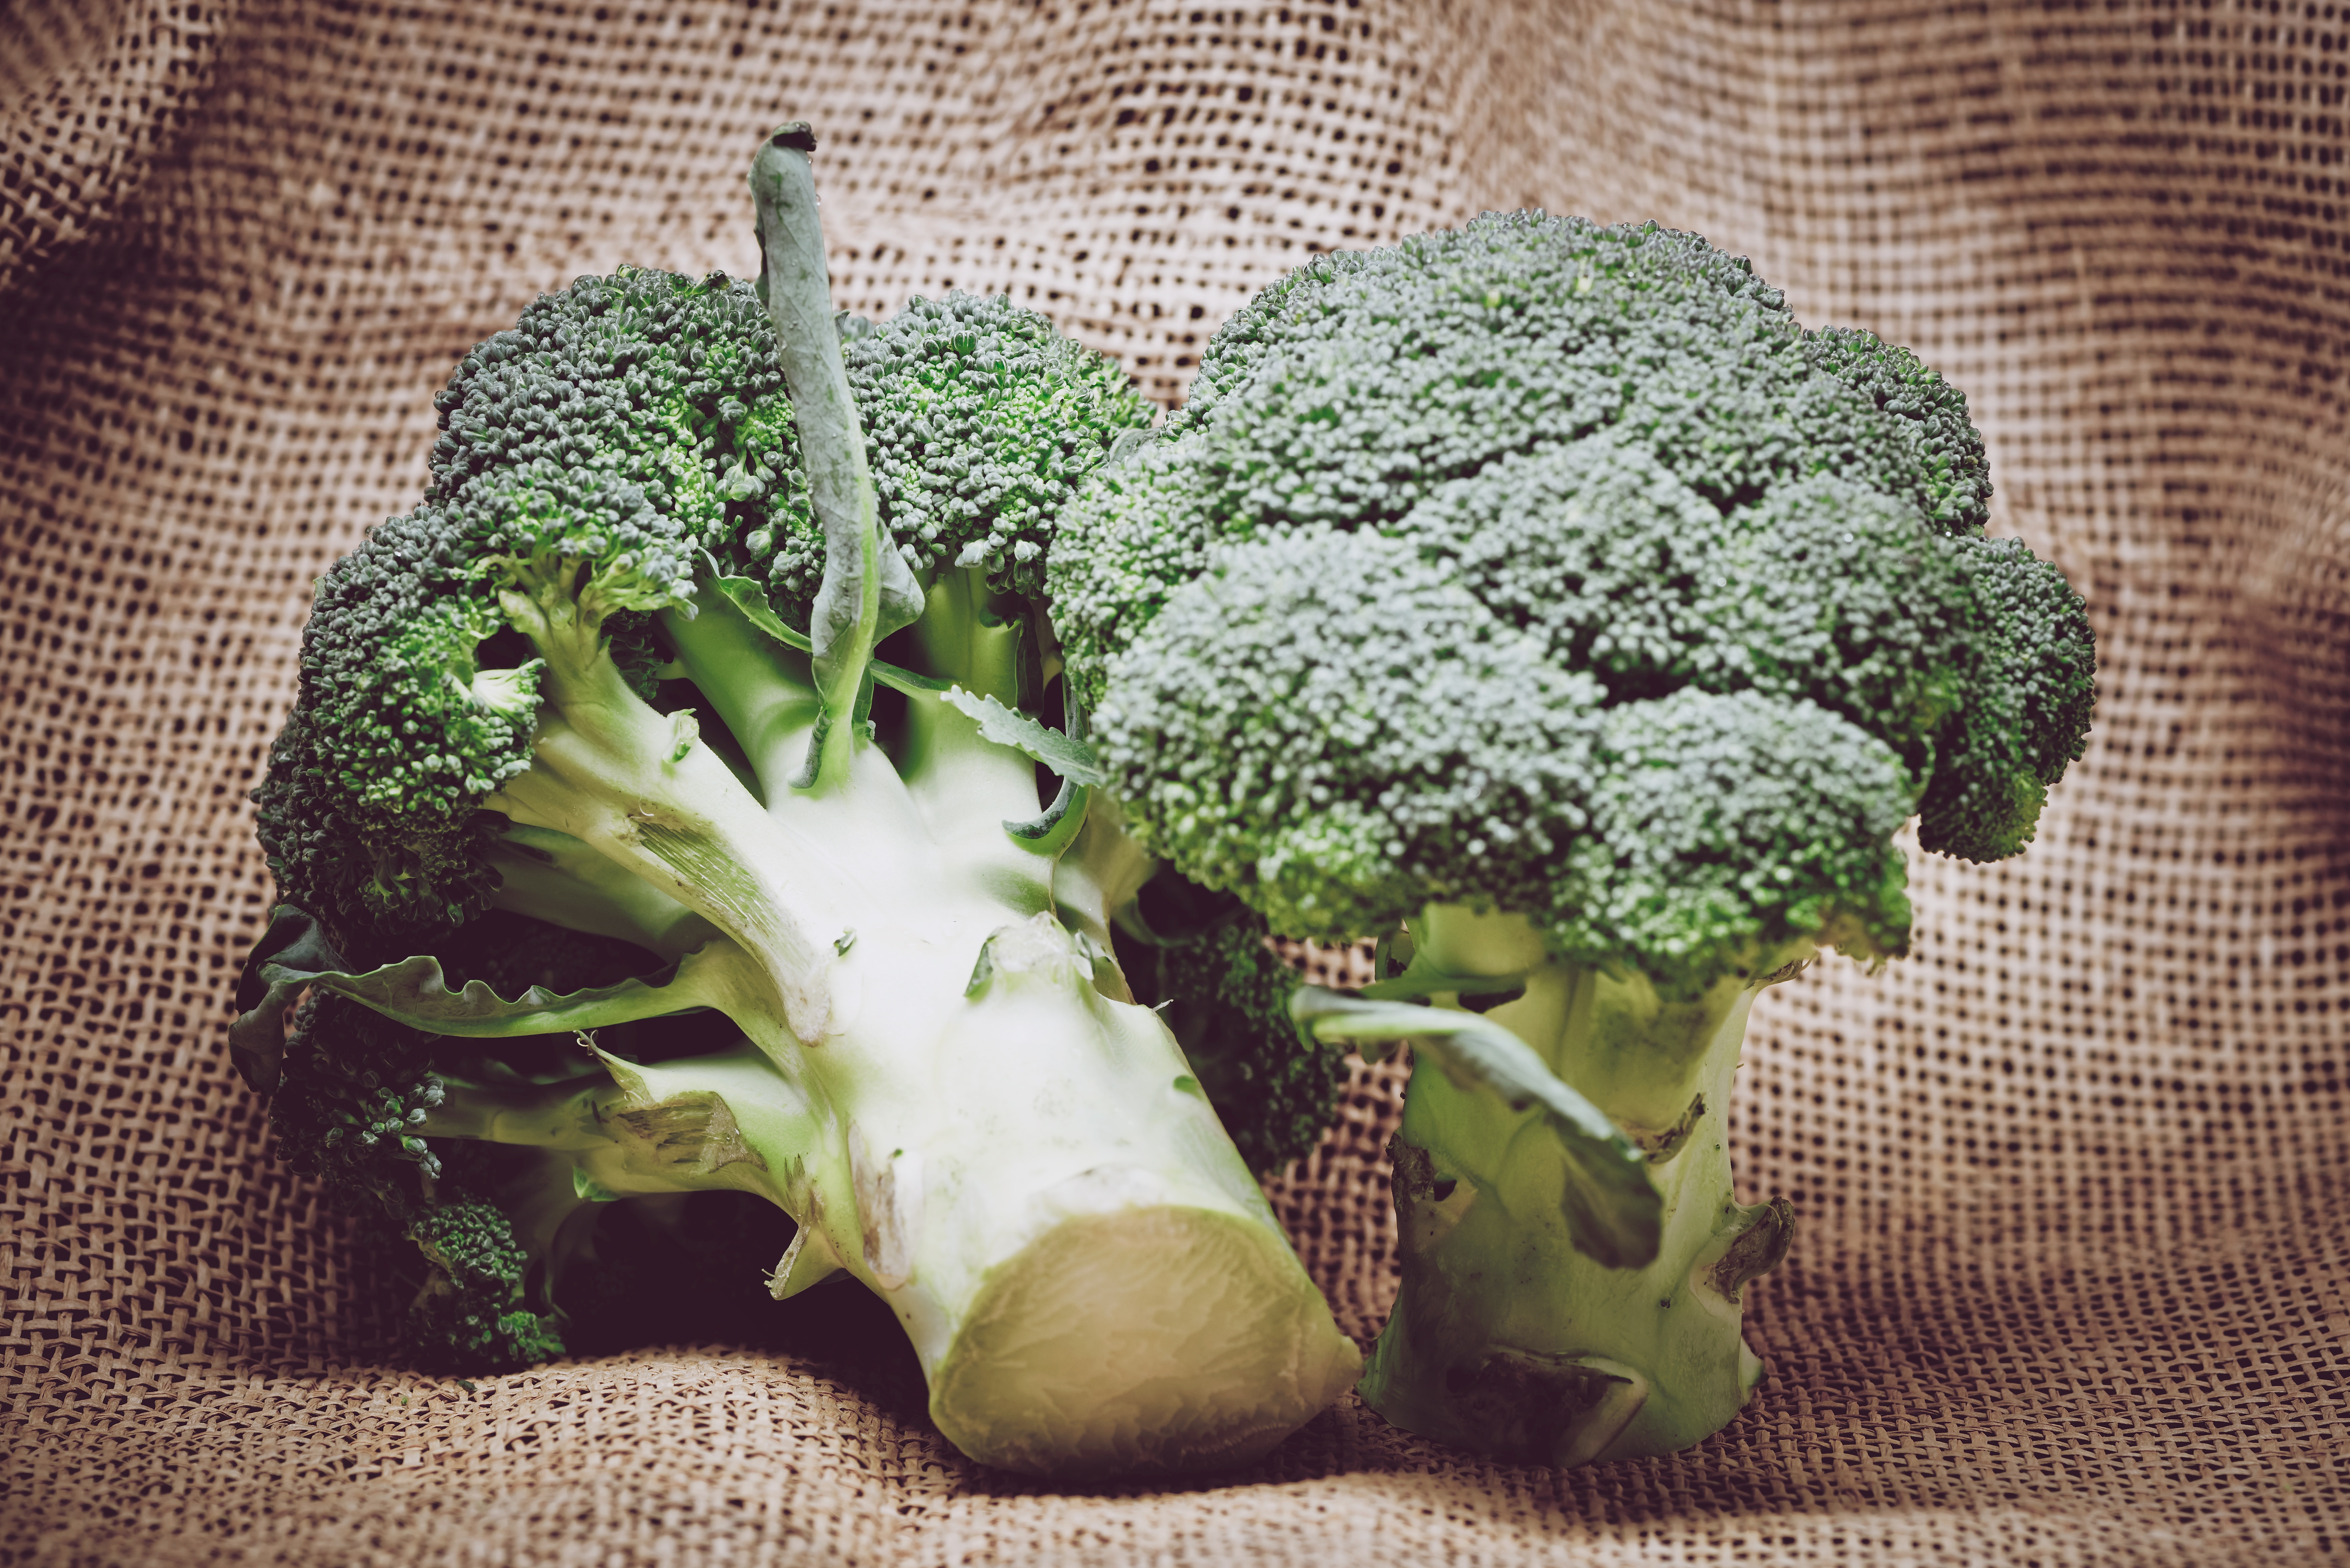 Broccoli lovers wanted for osteoarthritis trial 